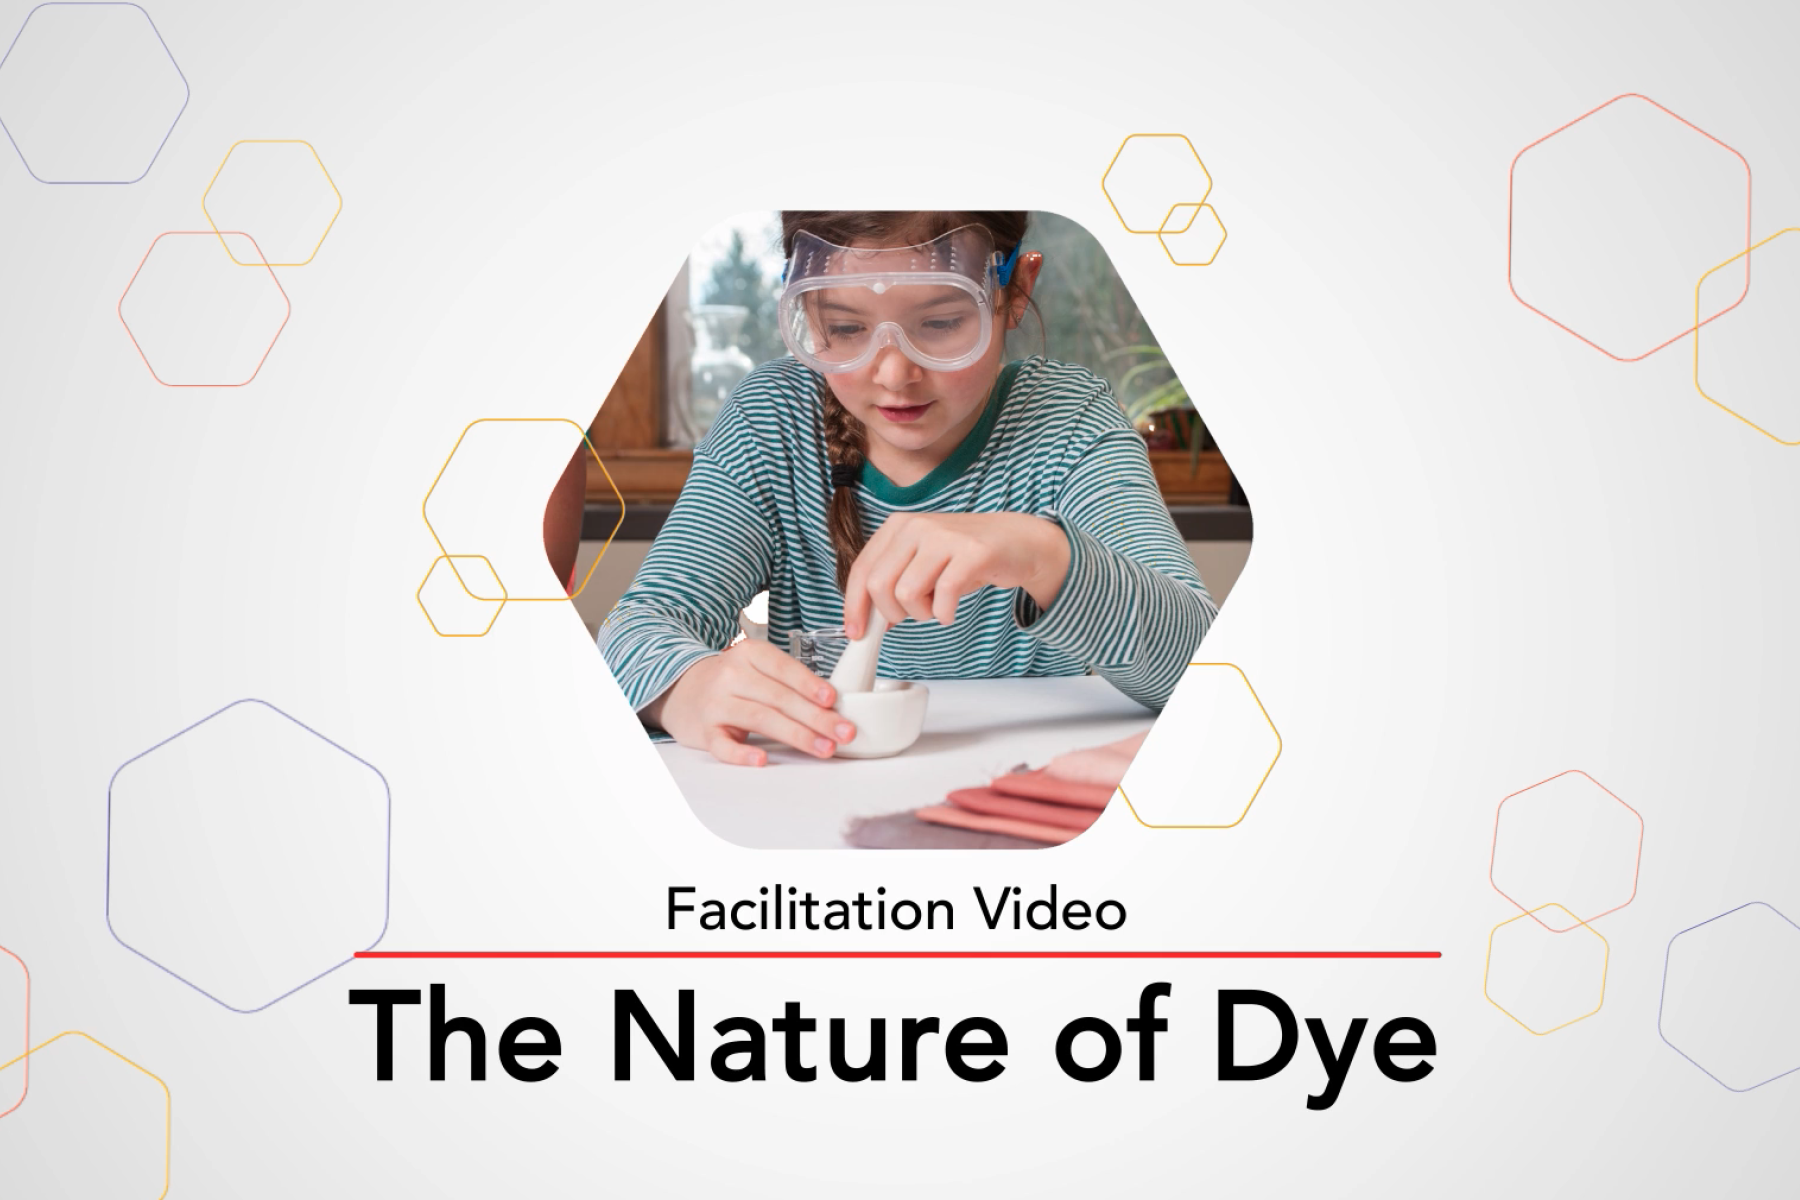 Screenshot of an opening slide for a video featuring a young learner crushing dye powder